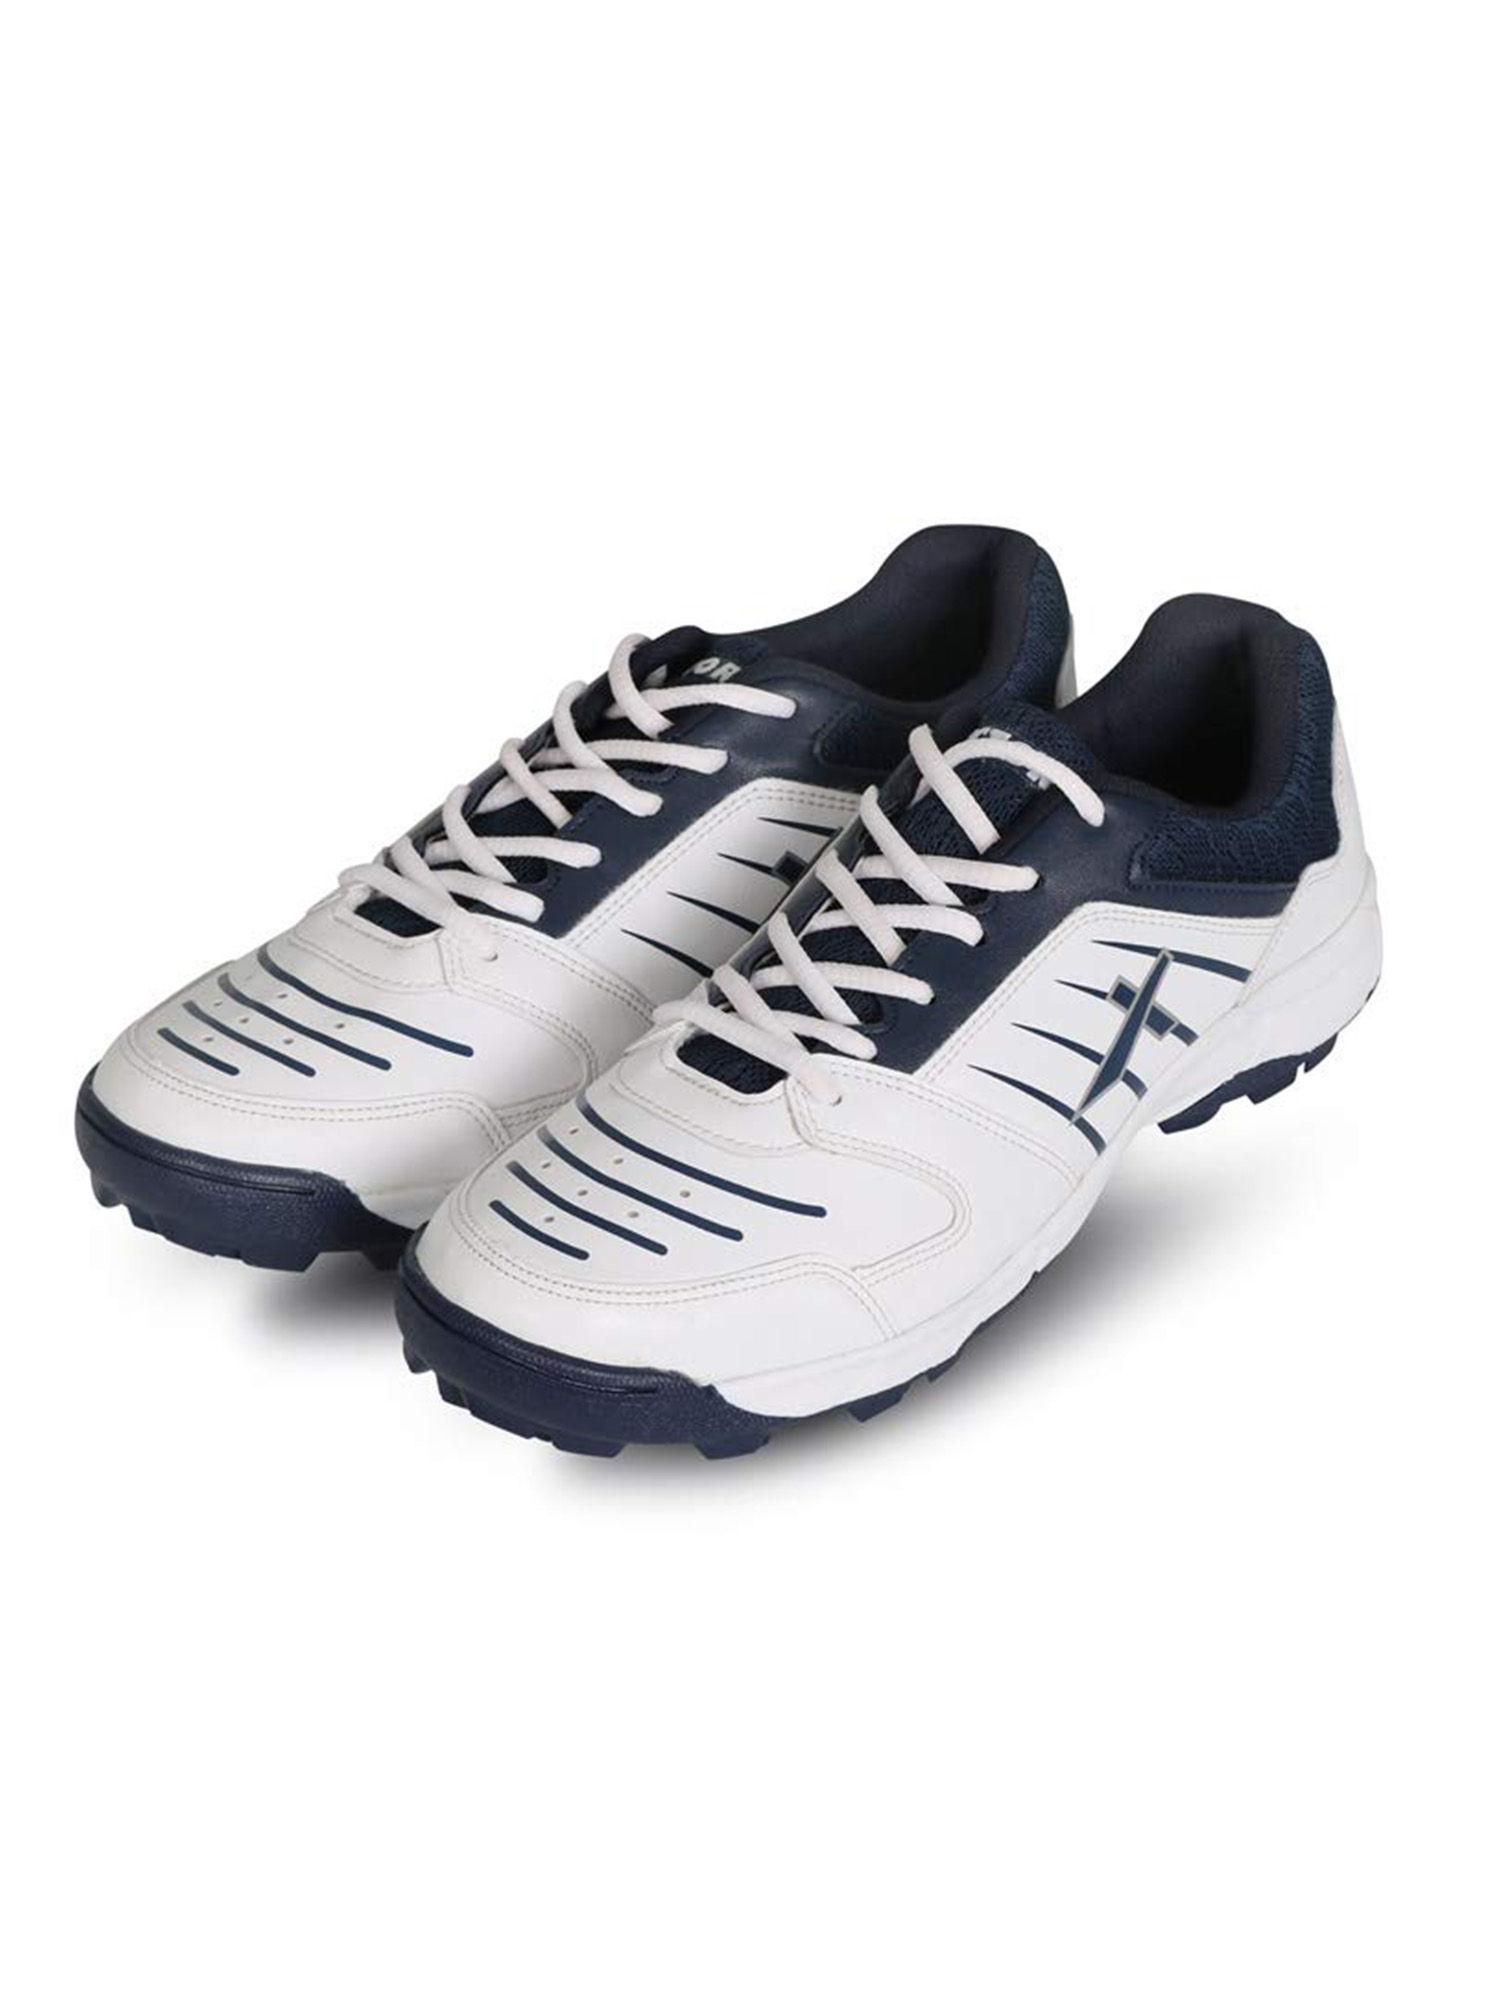 all rounder cricket shoes for men (white-navy)